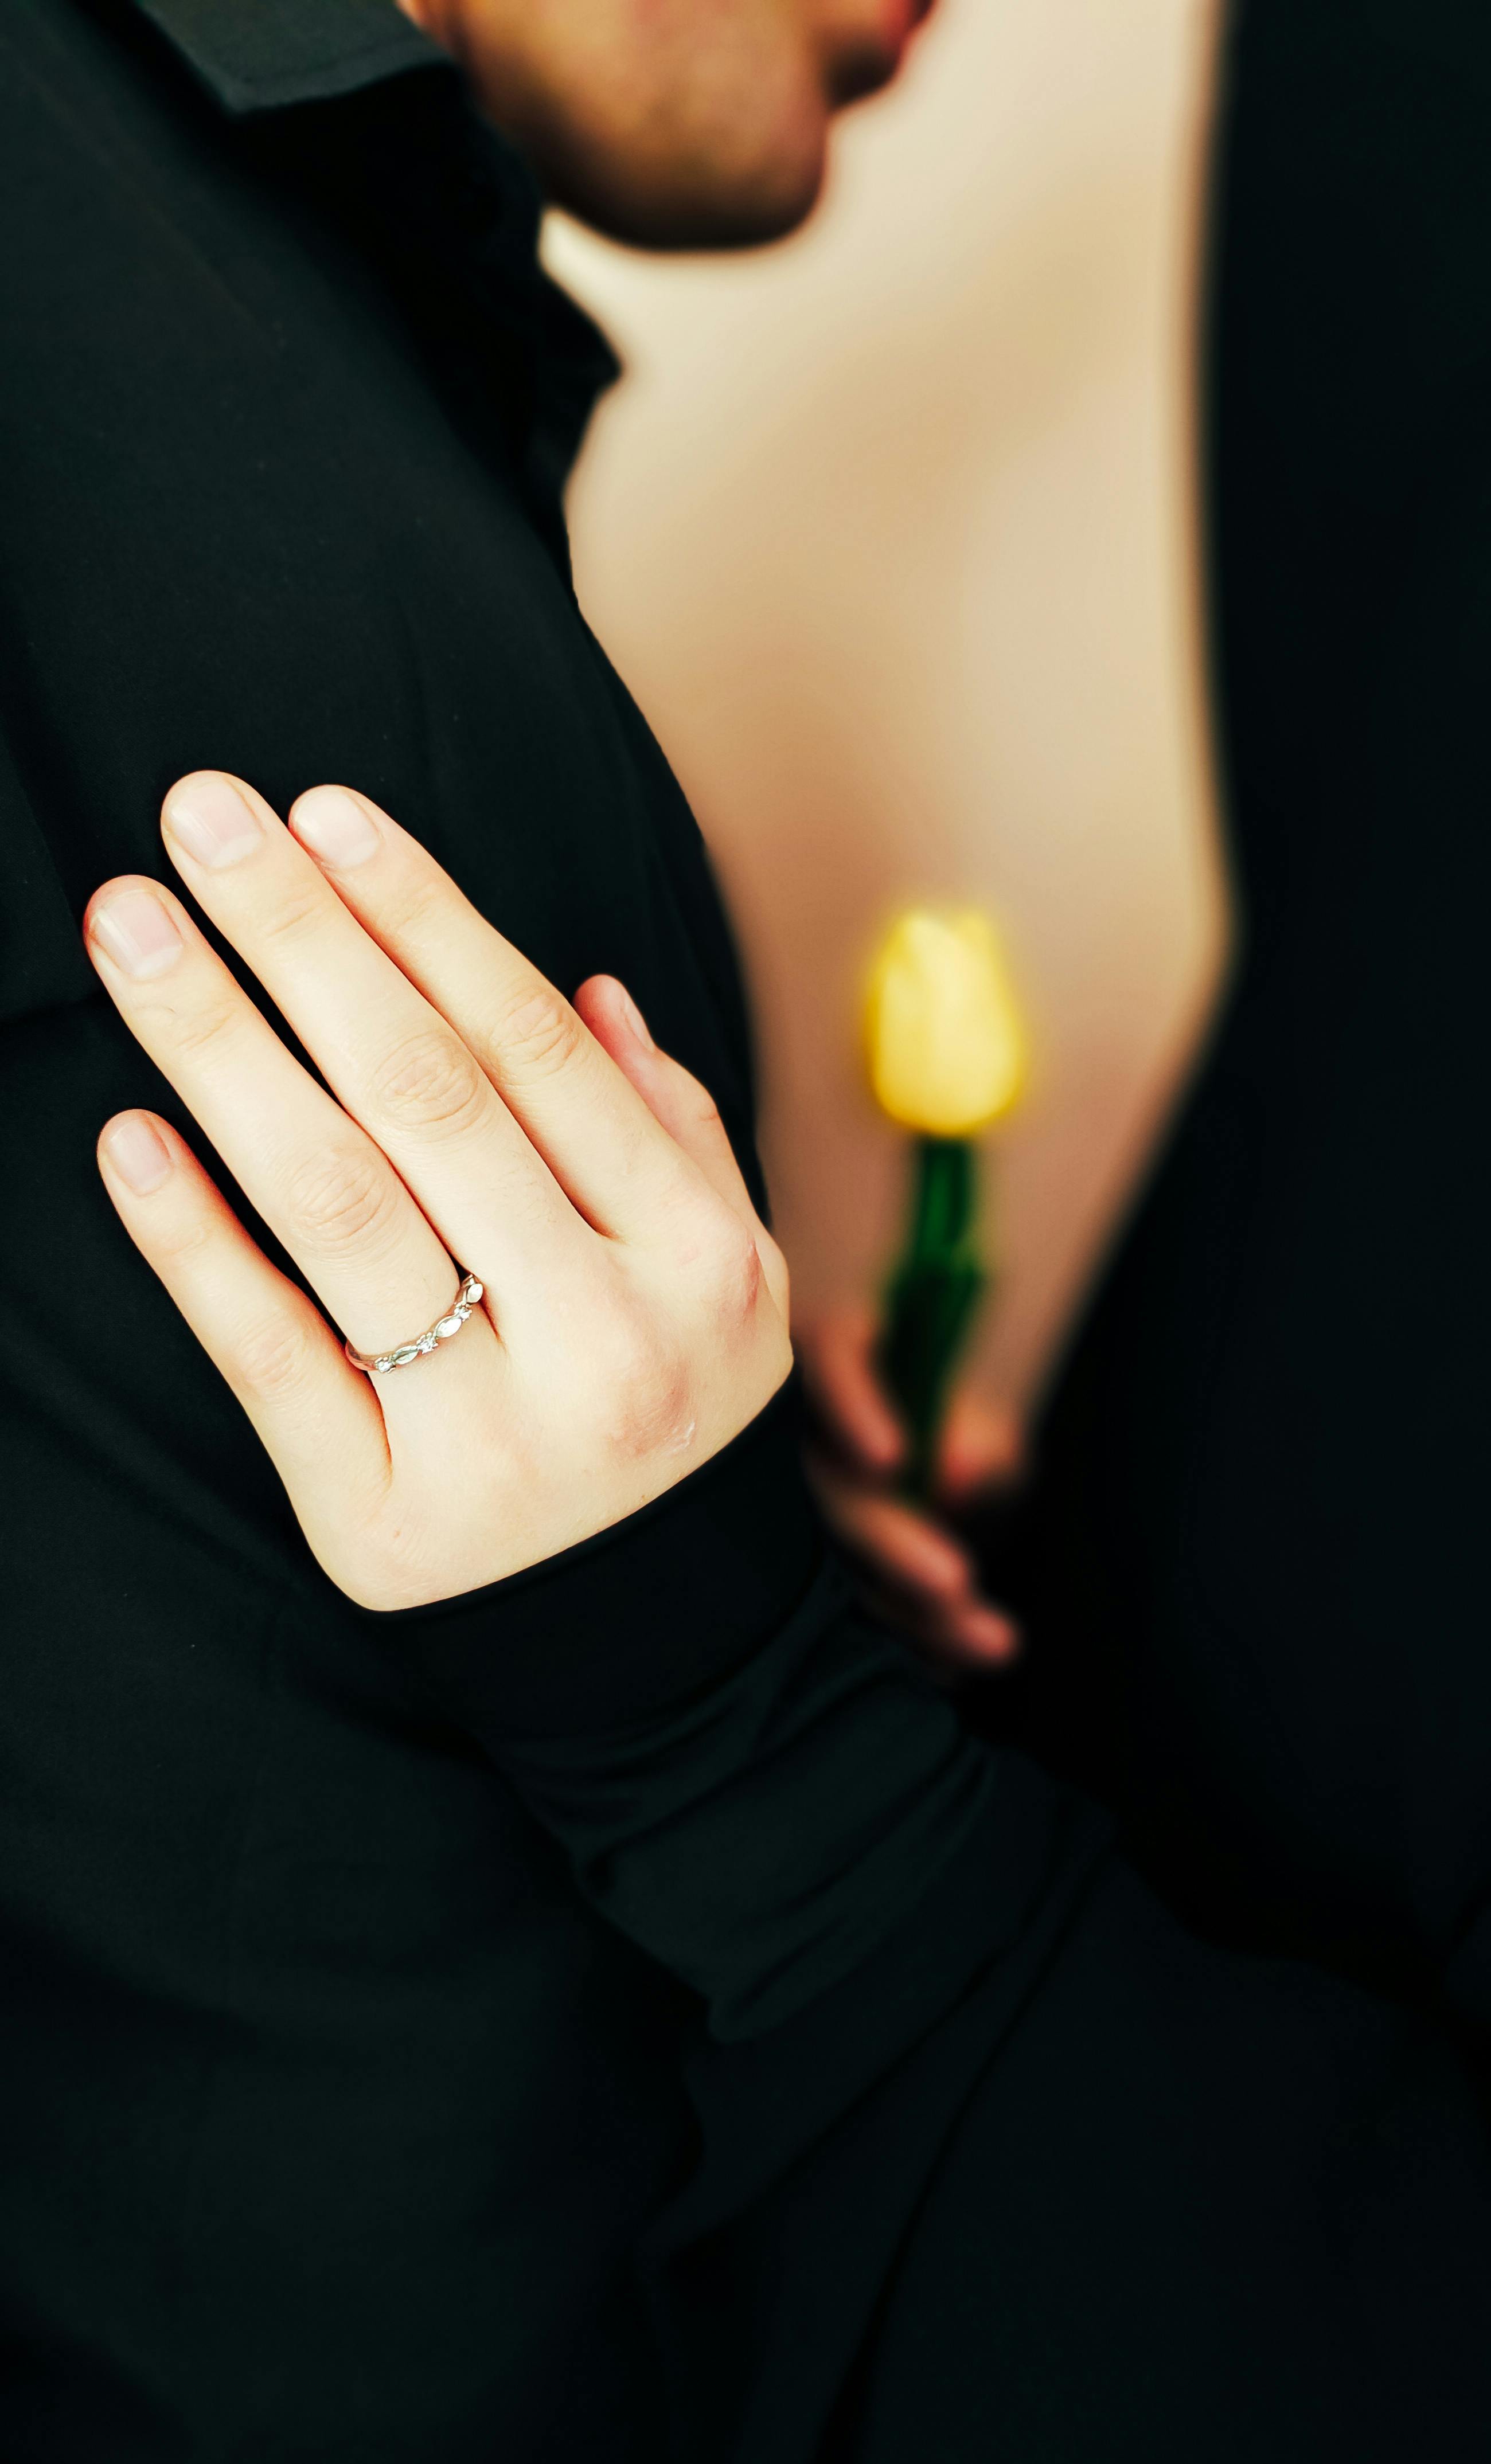 Premium Photo | A woman's hand with a ring on her finger is surrounded by  flowers.